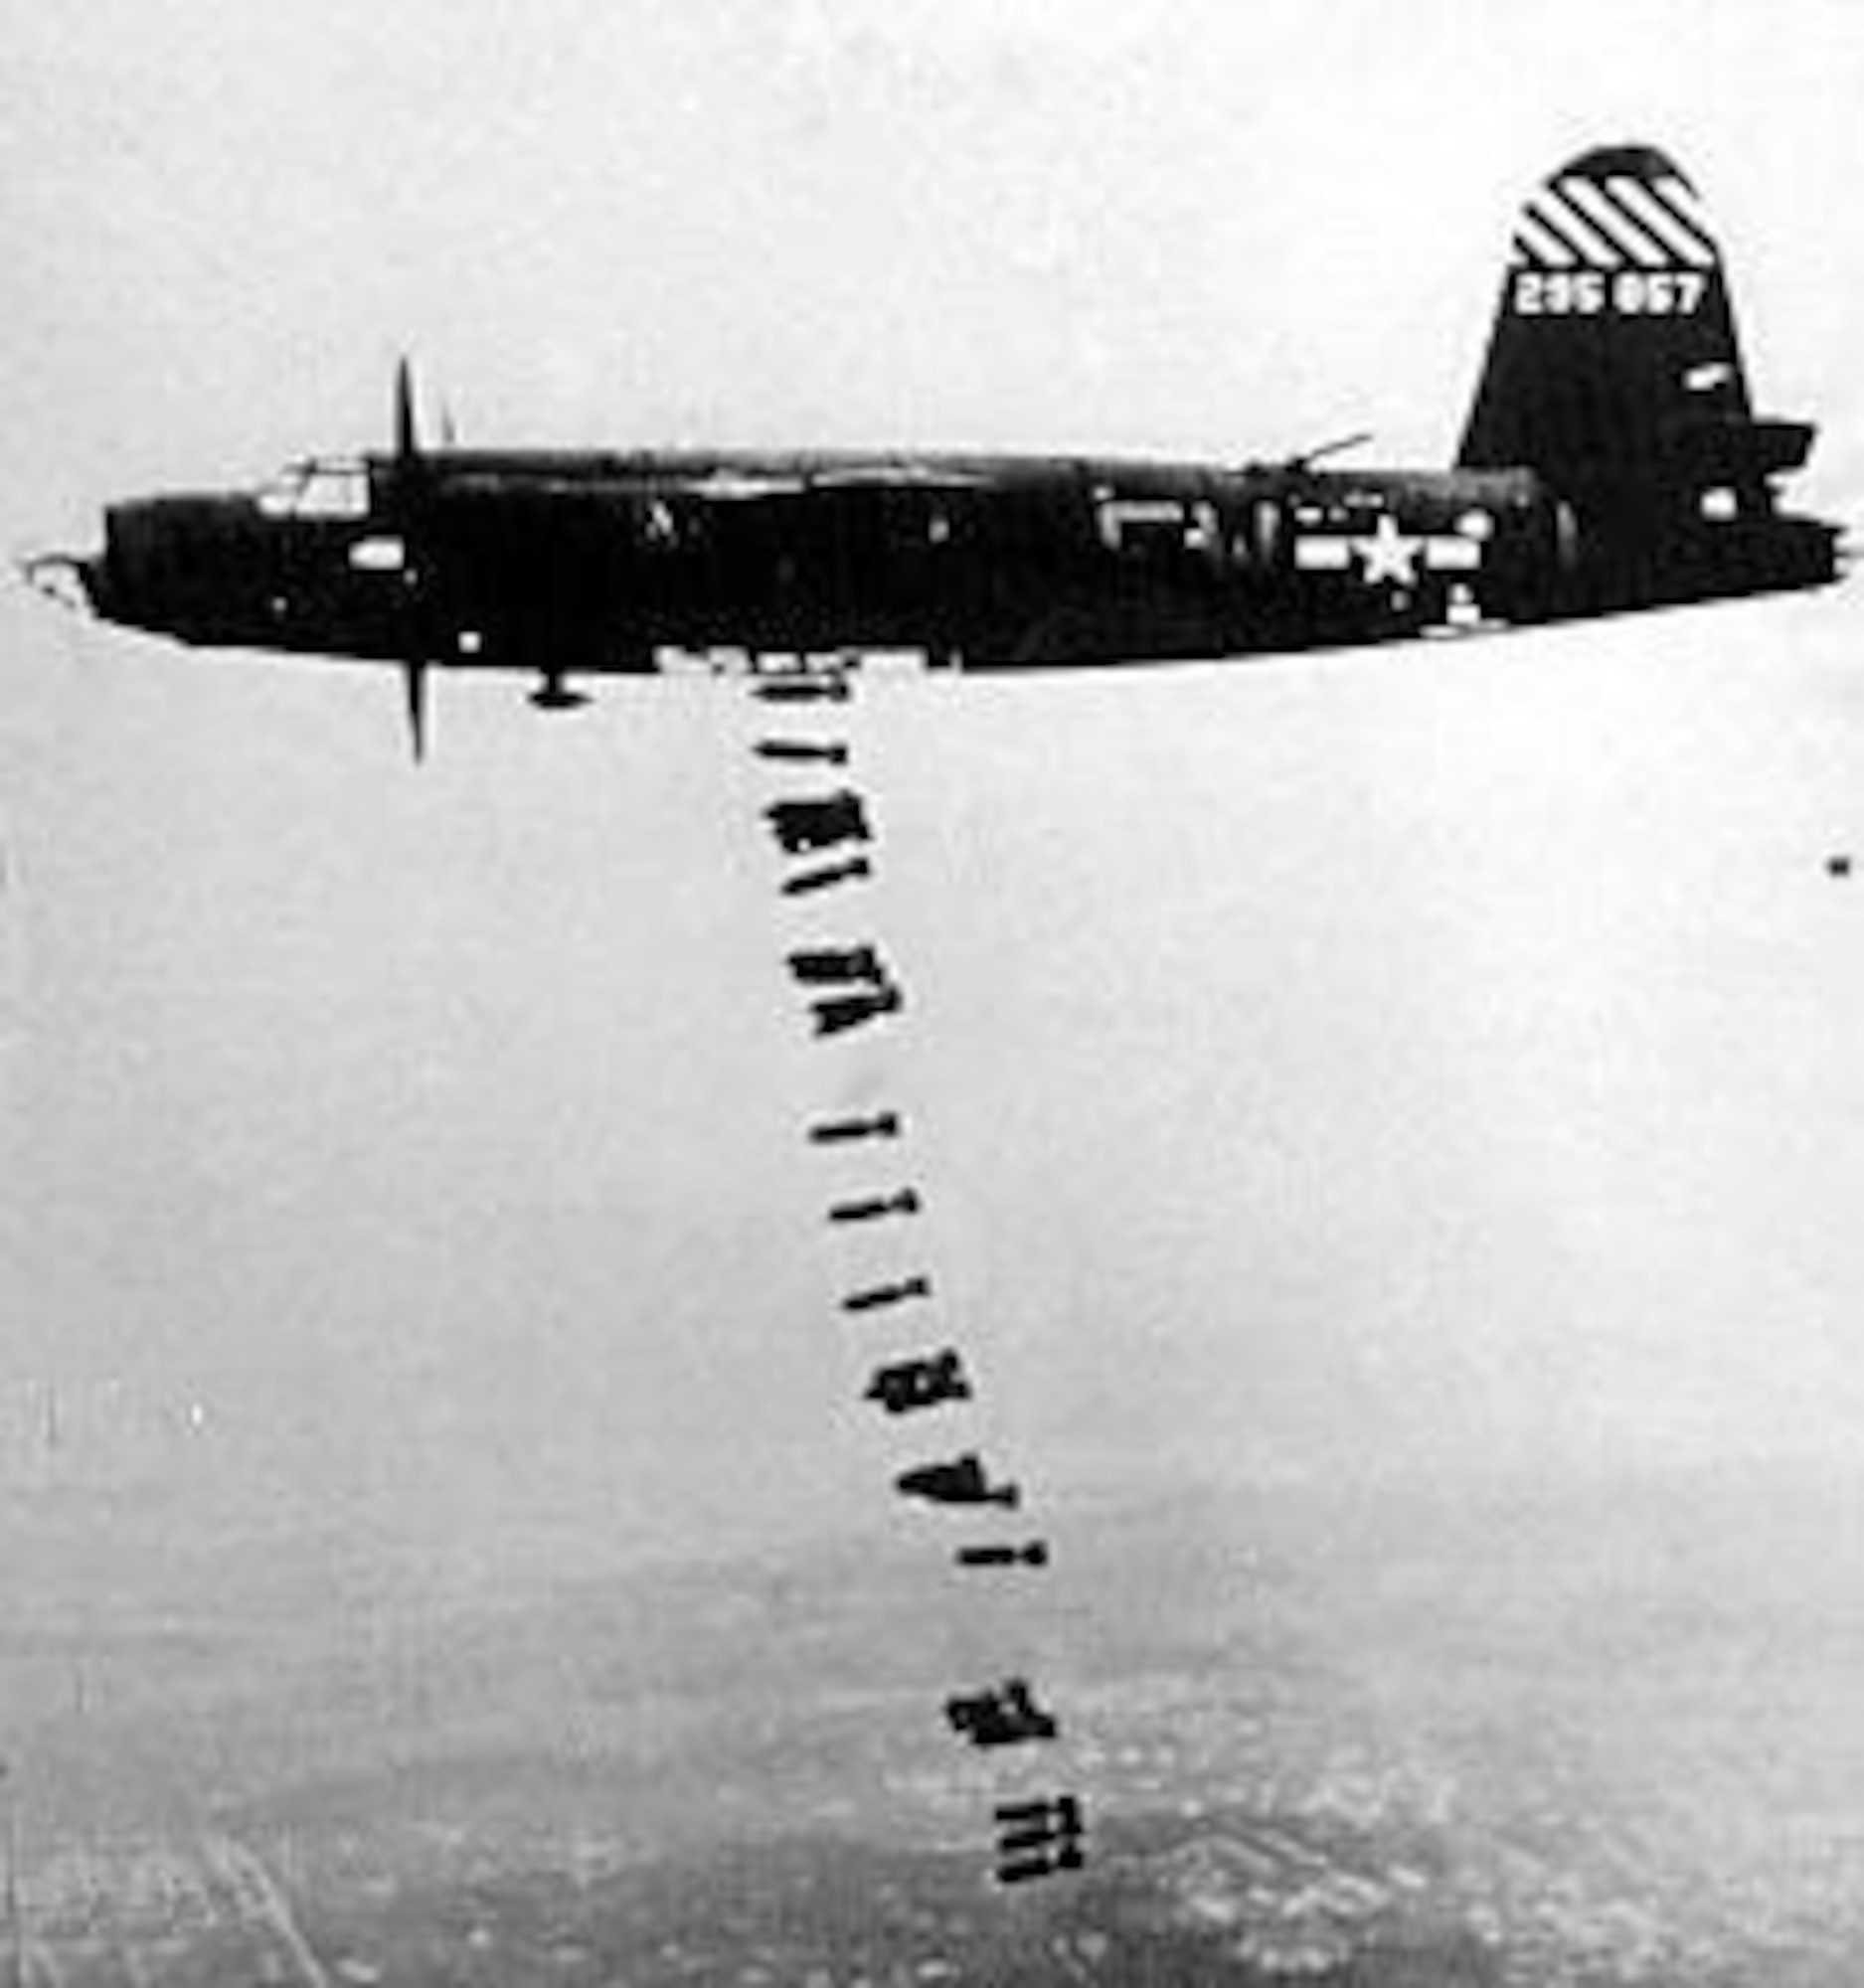 A B-26 drops bombs on a German installation in France. (U.S. Air Force photo)